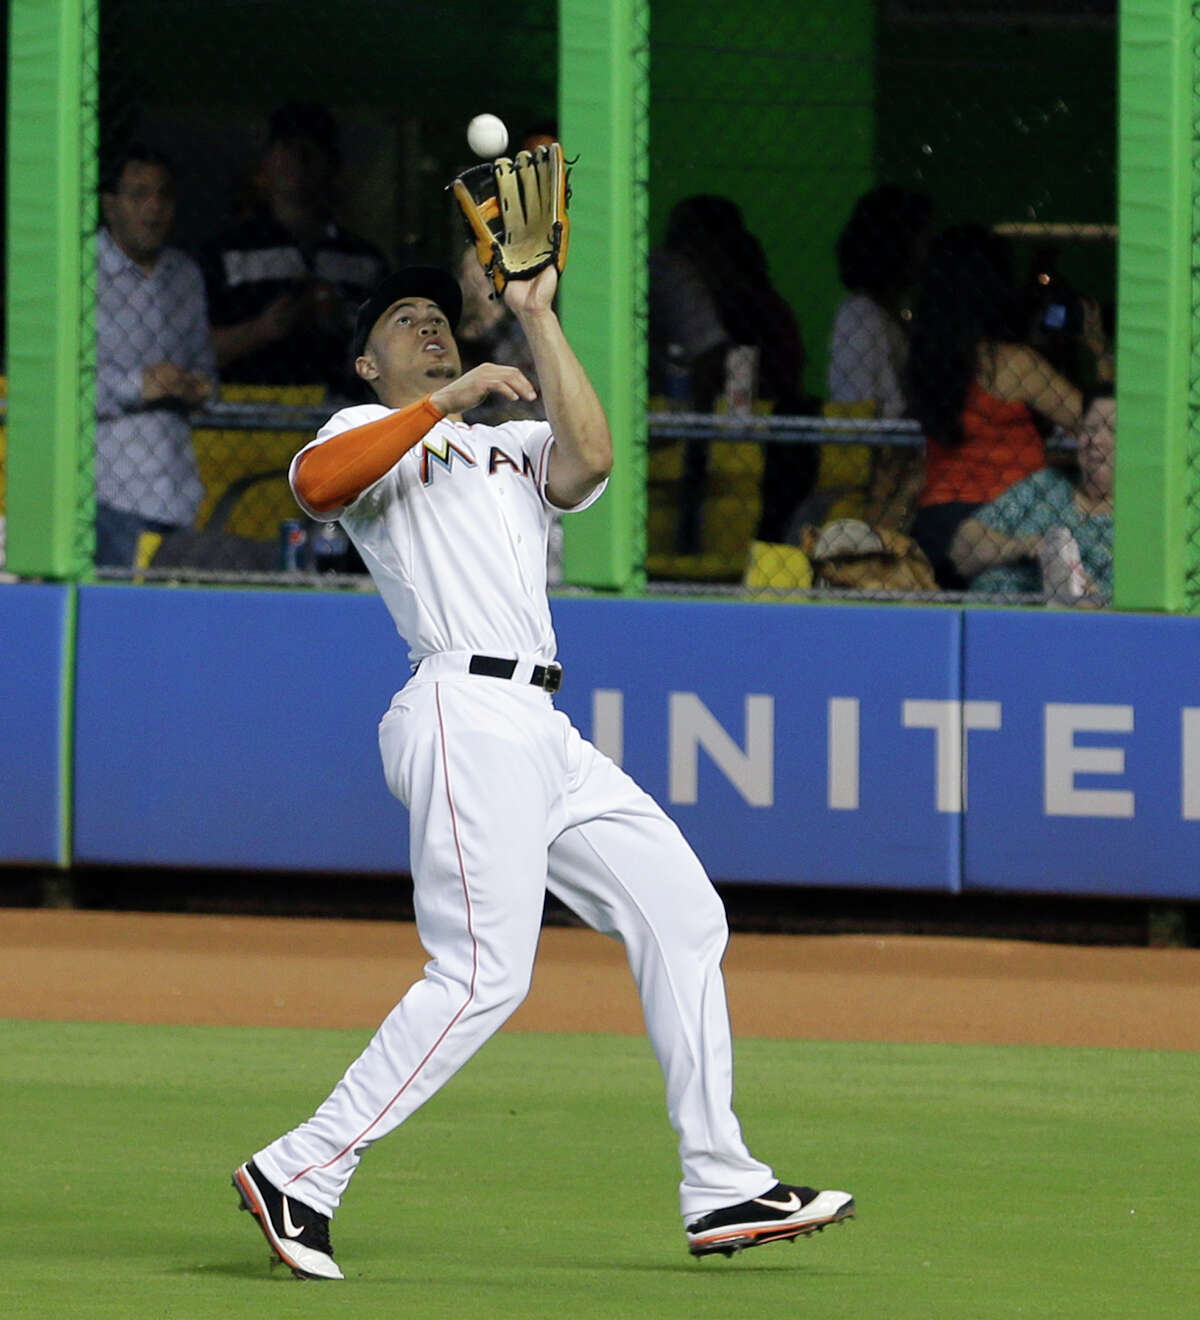 Mike Stanton has three hits in big-league debut, but Marlins lose to  Phillies